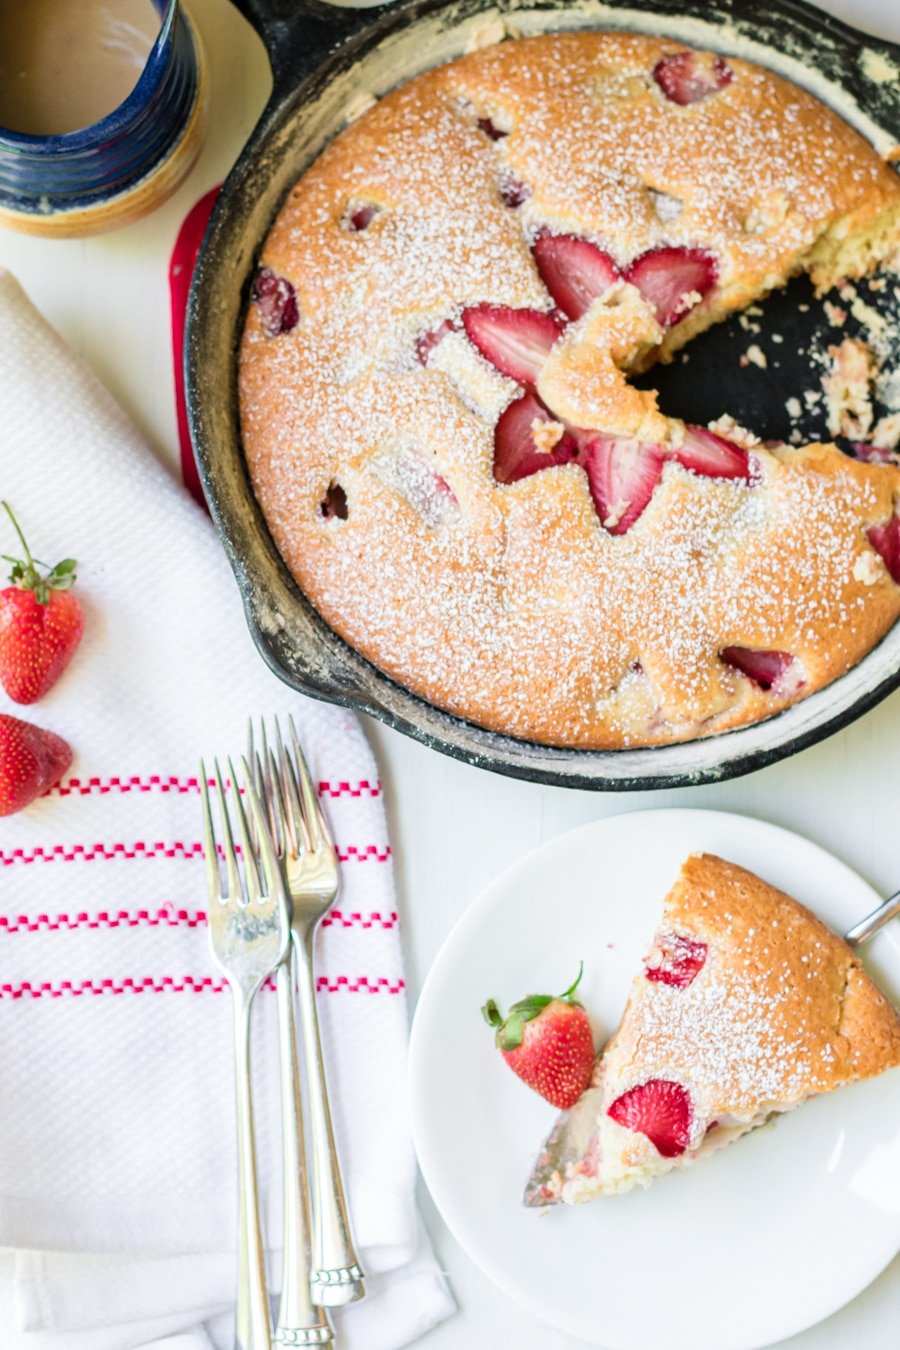 Strawberry cake in Skillet with a slice on a plate next to it